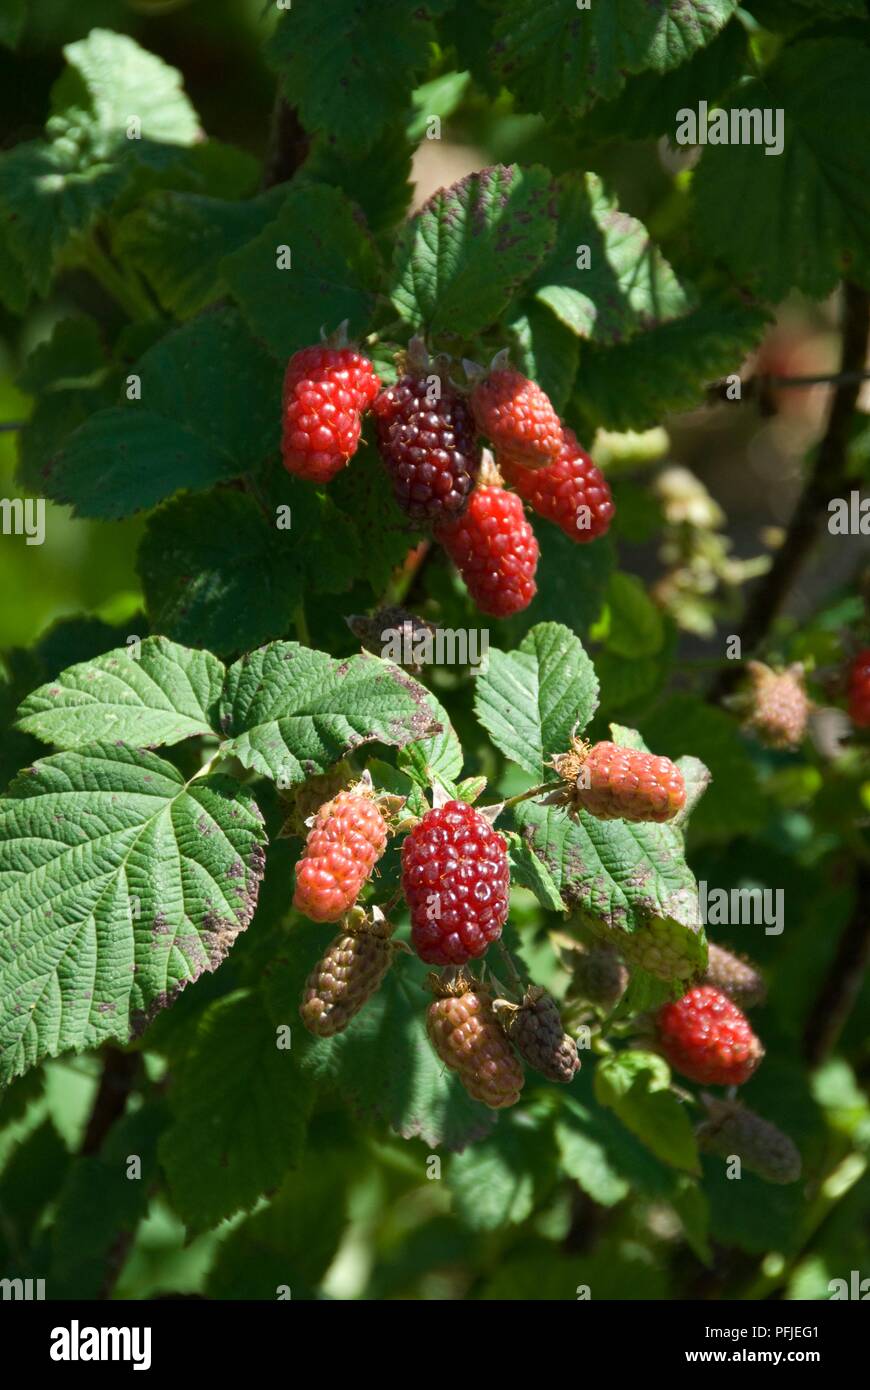 Tayberries on shrub, close-up Stock Photo